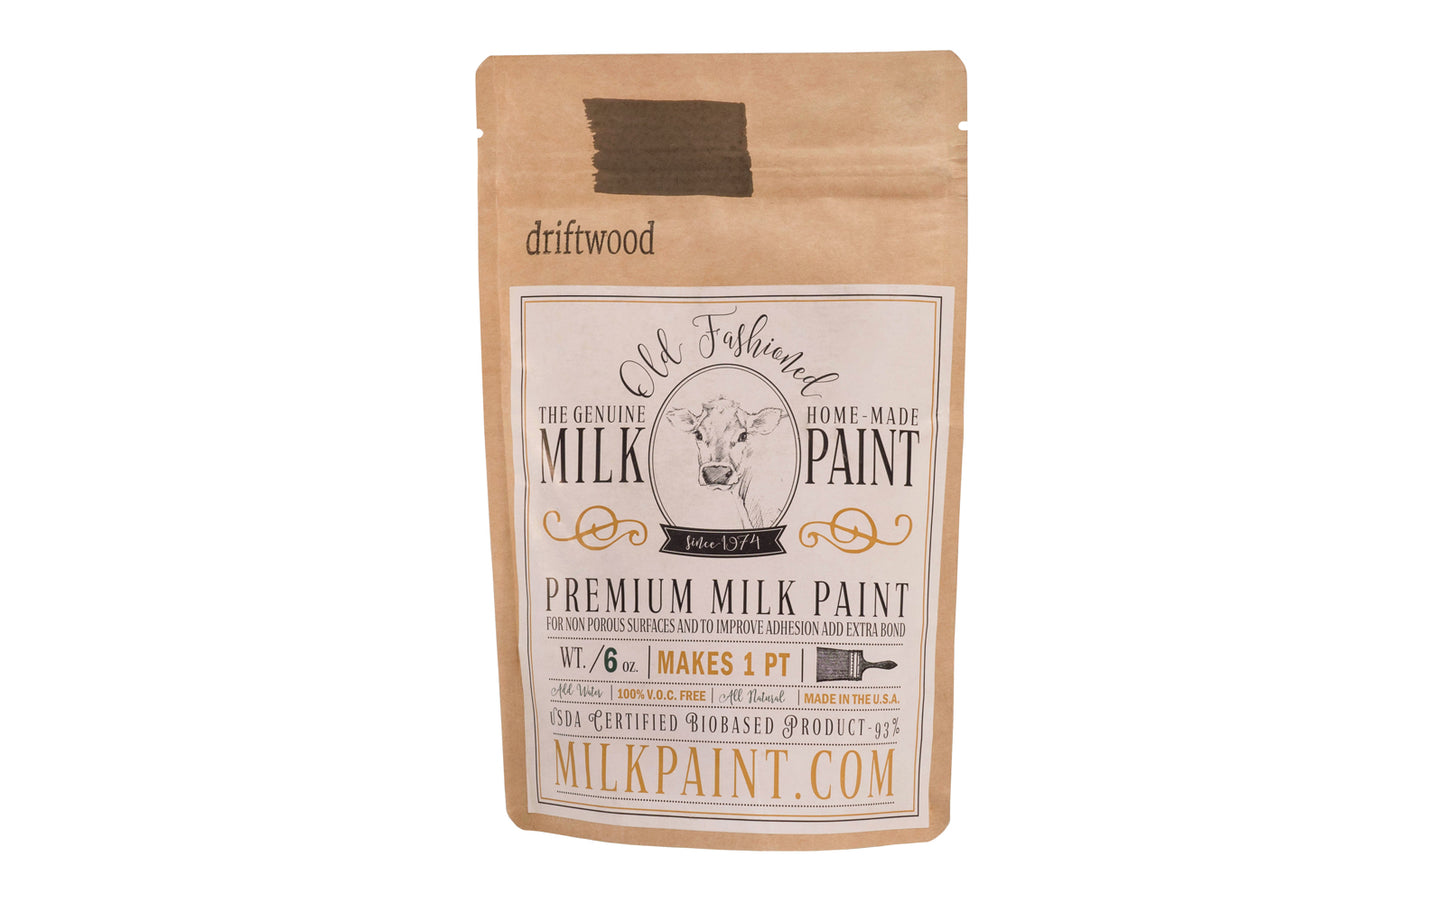 This Milk Paint color is "Driftwood" color - Dusty brown with gray undertones. Comes in a powder form, you can control how thick/thin you mix the paint. Use it as you would regular paint, thinner for a wash/stain or thicker to create texture. Environmentally safe, non-toxic & is food safe. 100% VOC free. Powder Paint